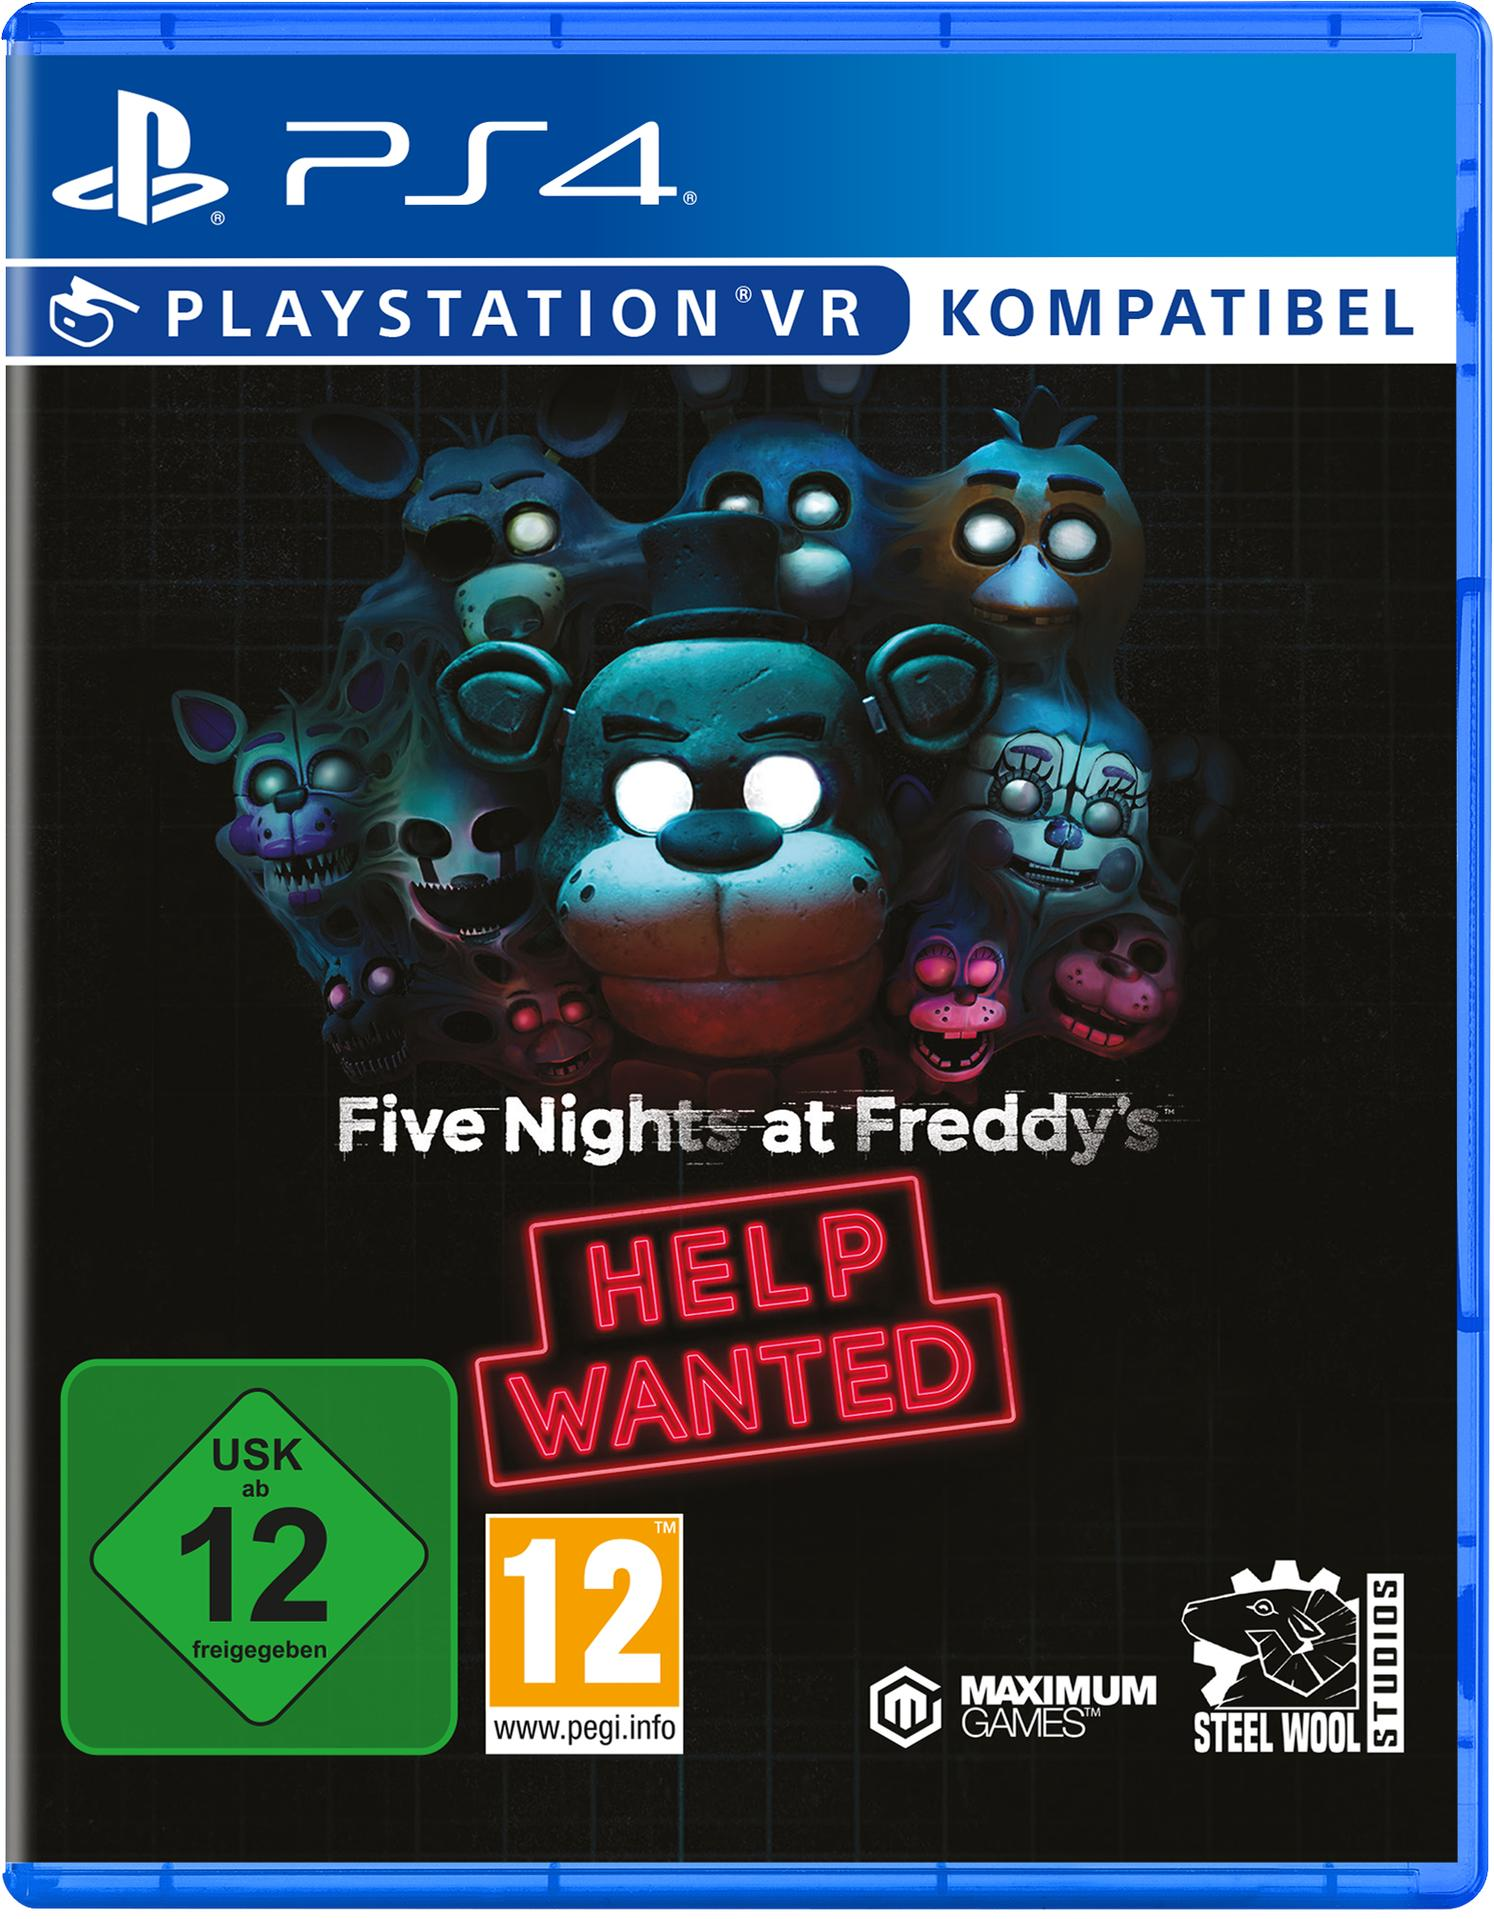 Wanted 4] [PlayStation - at Freddy\'s: Nights Help Five